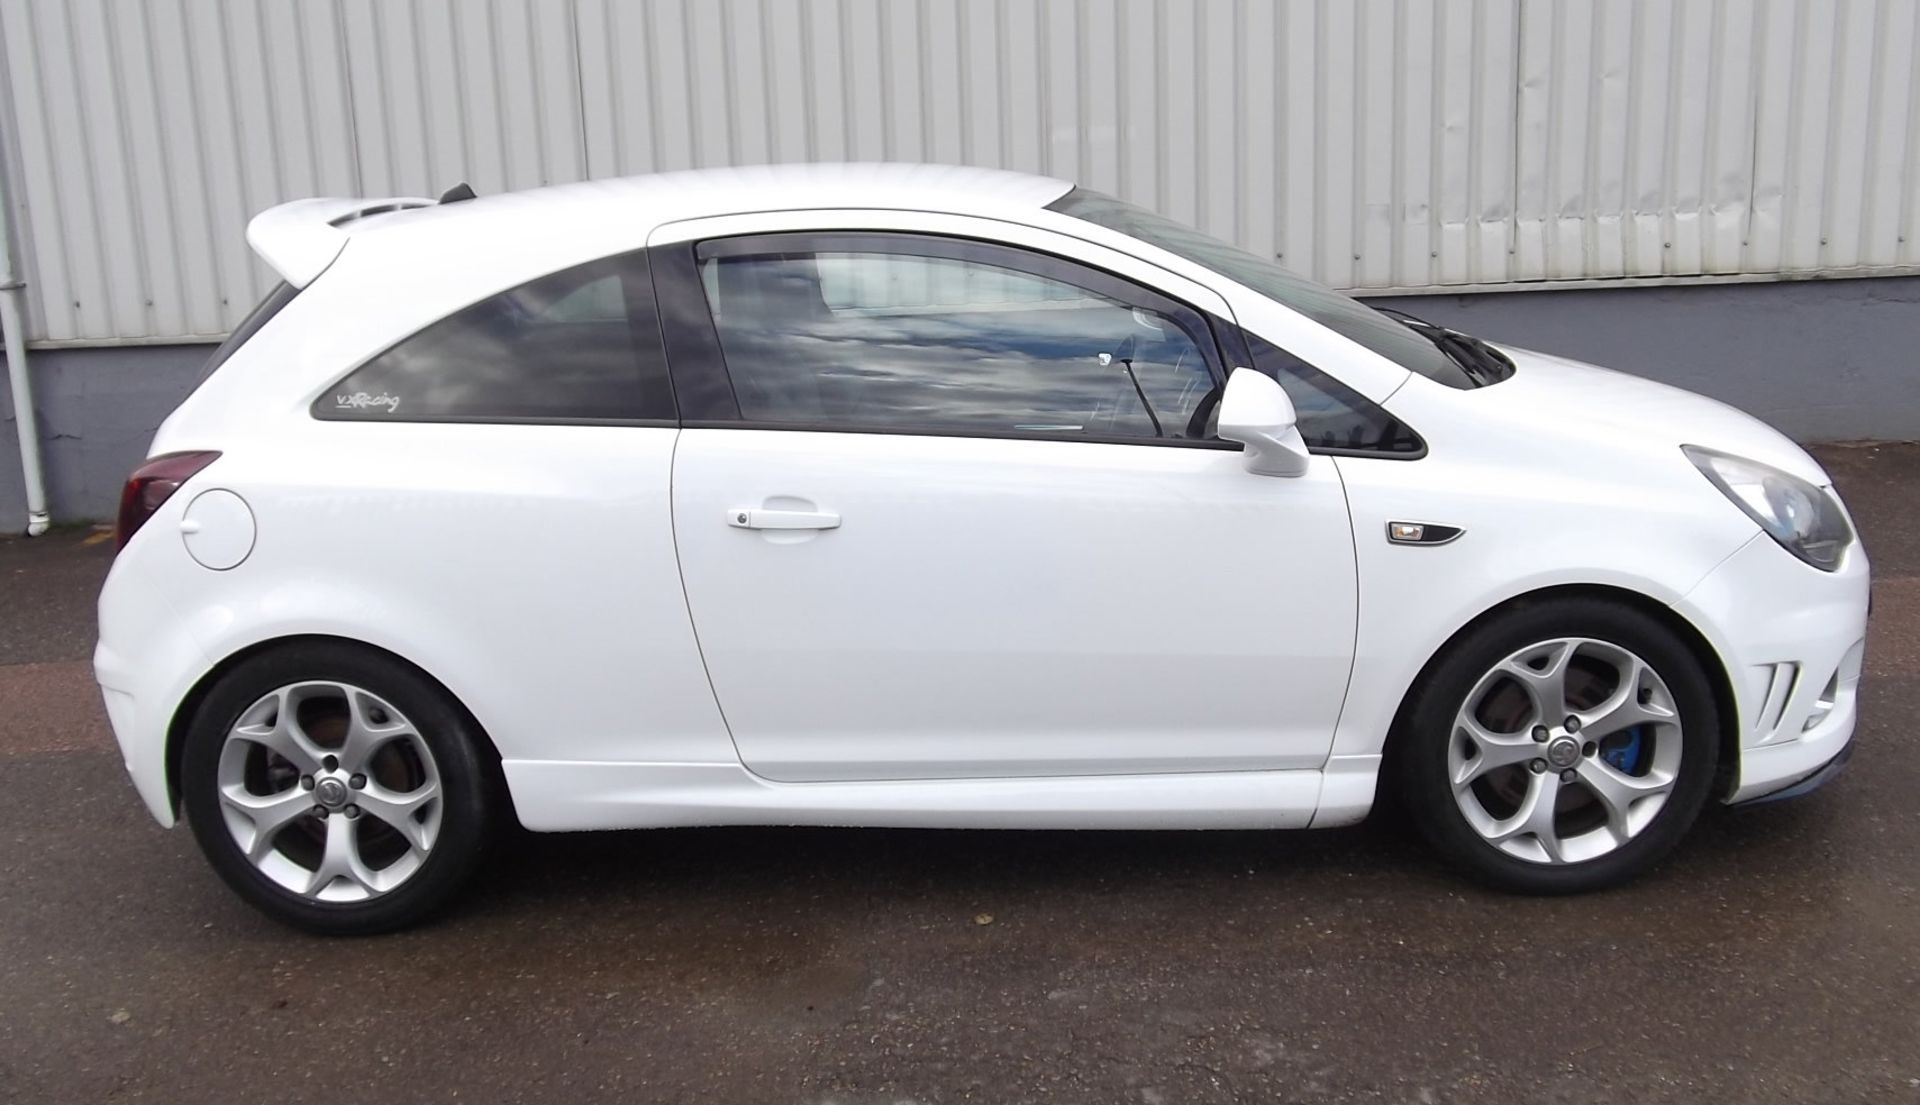 2012 Vauxhall Corsa 1.6T VXR 3 Door Hatchback - CL505 - NO VAT ON THE HAMMER - Location: Corby, - Image 10 of 24